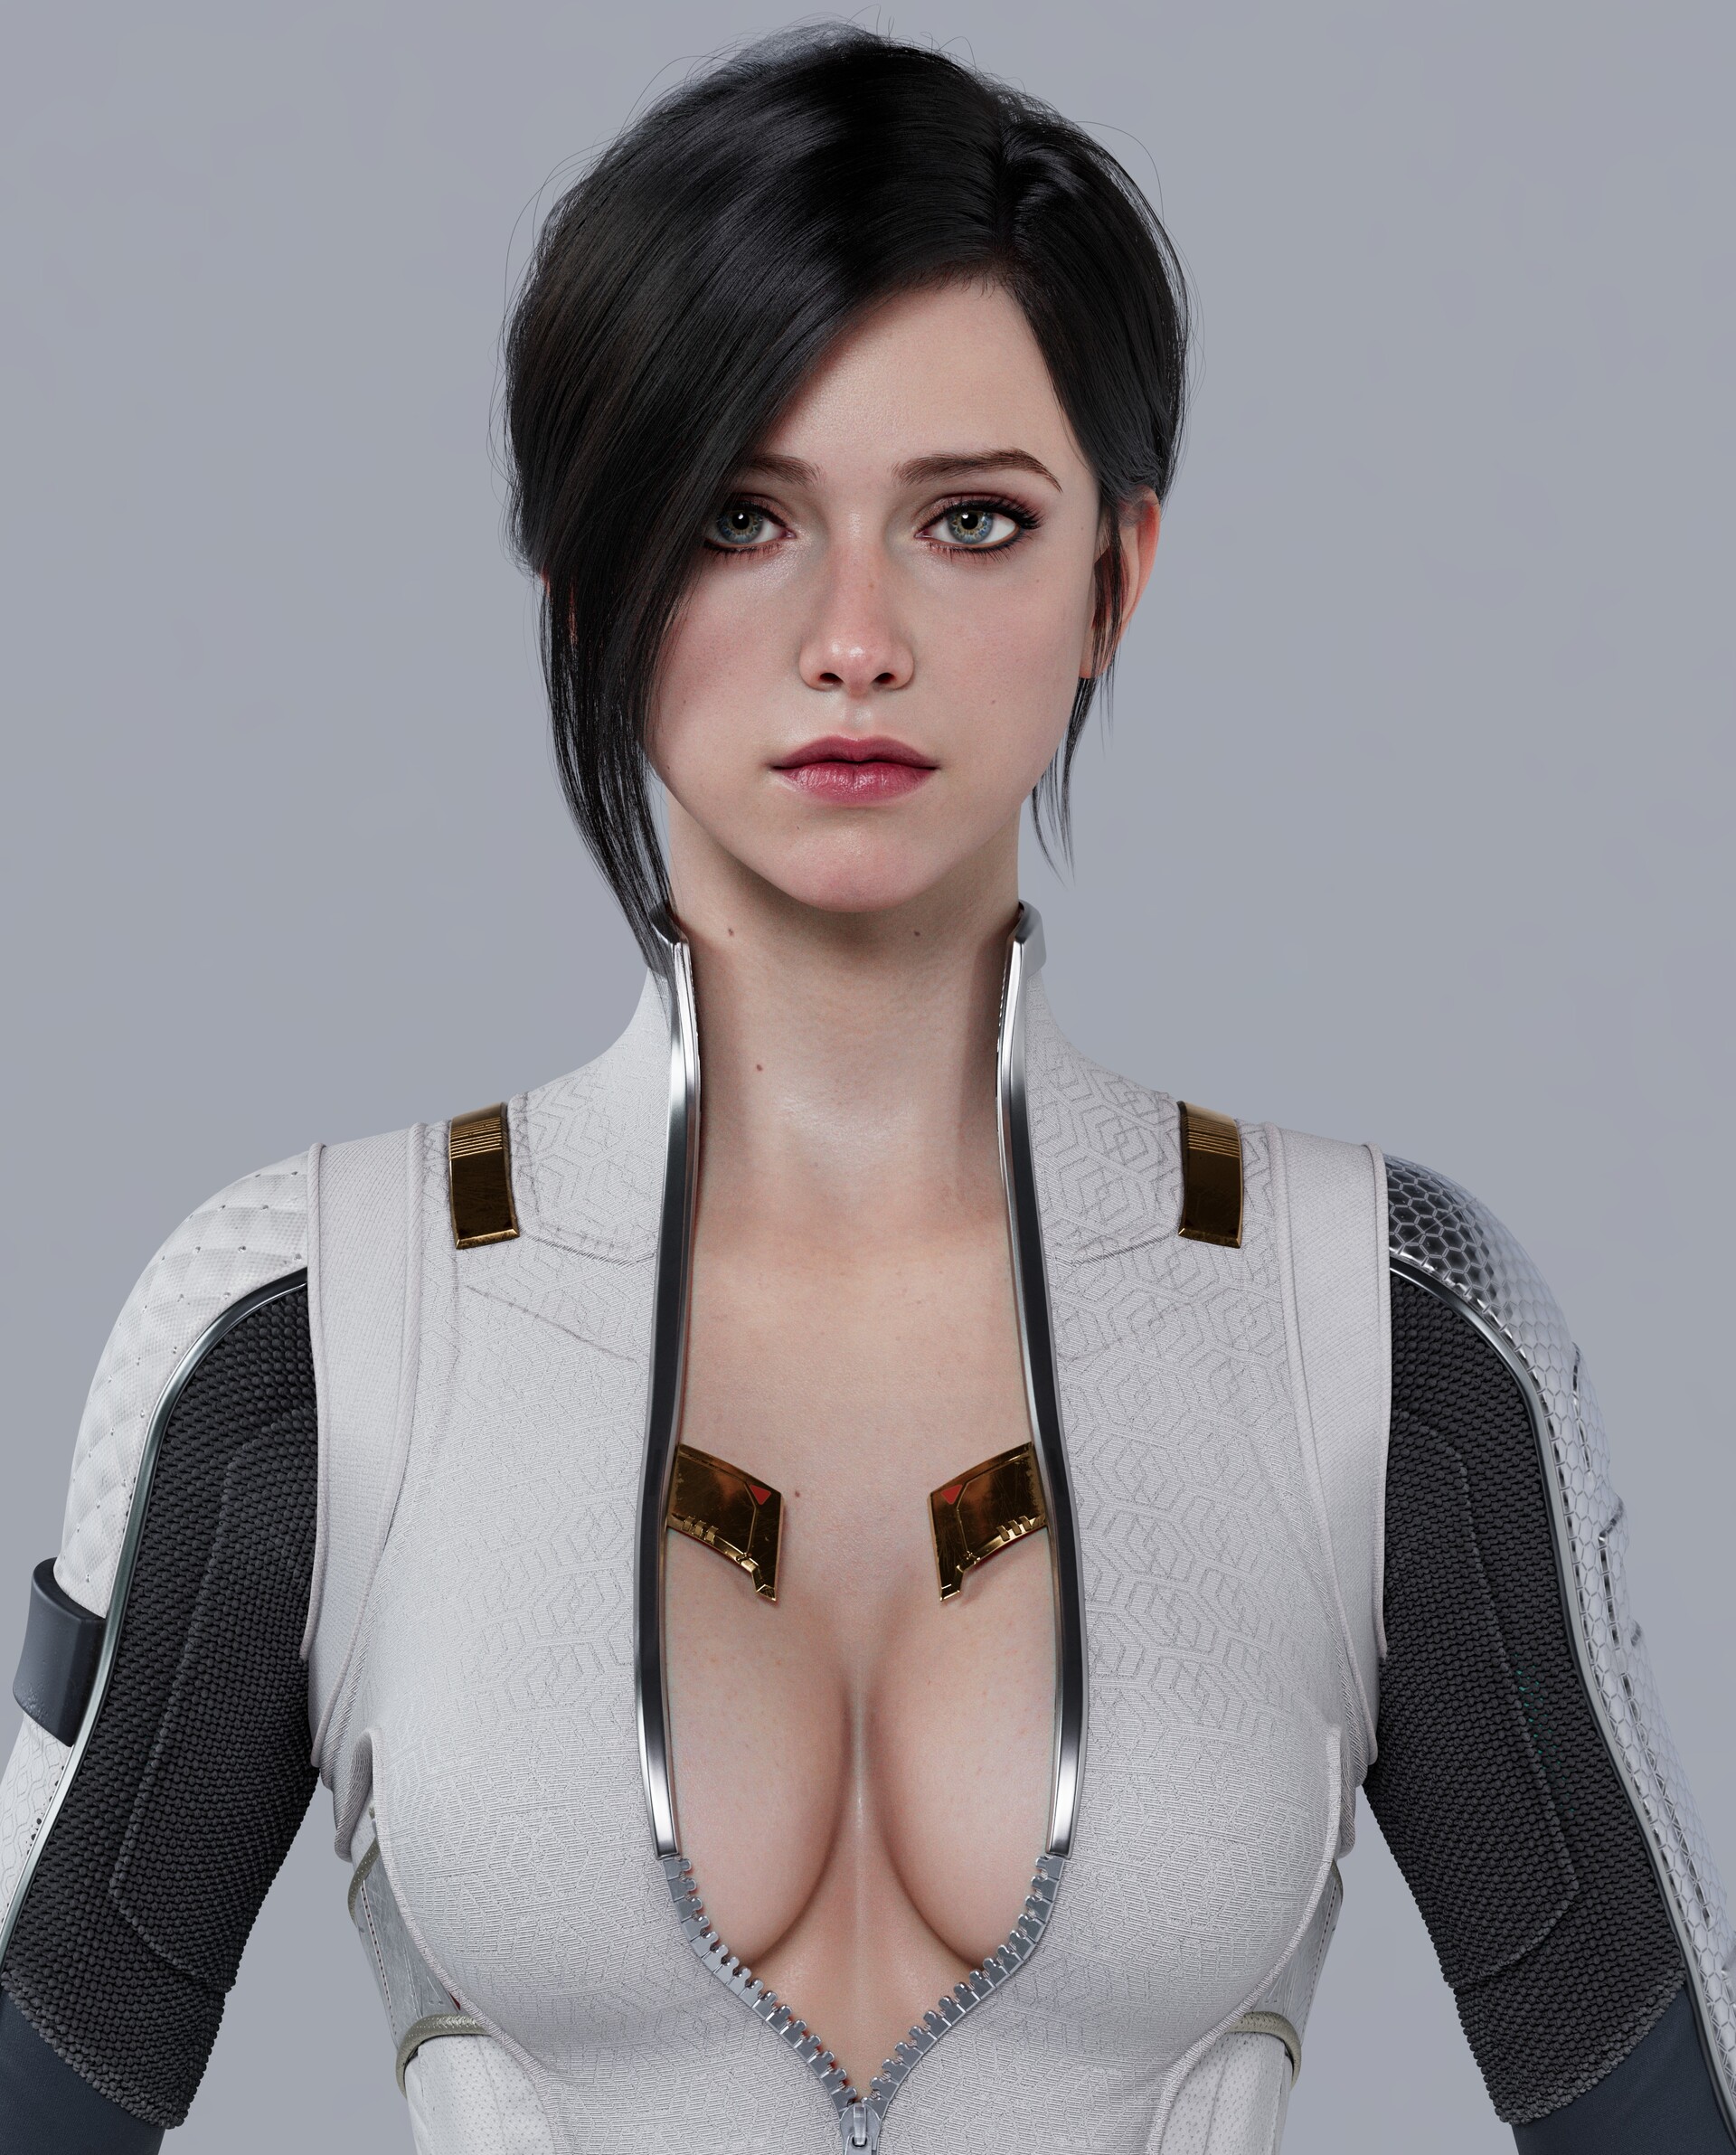 General 1920x2383 Dong Liuhao women dark hair unzipped simple background gold science fiction open clothes boobs cleavage